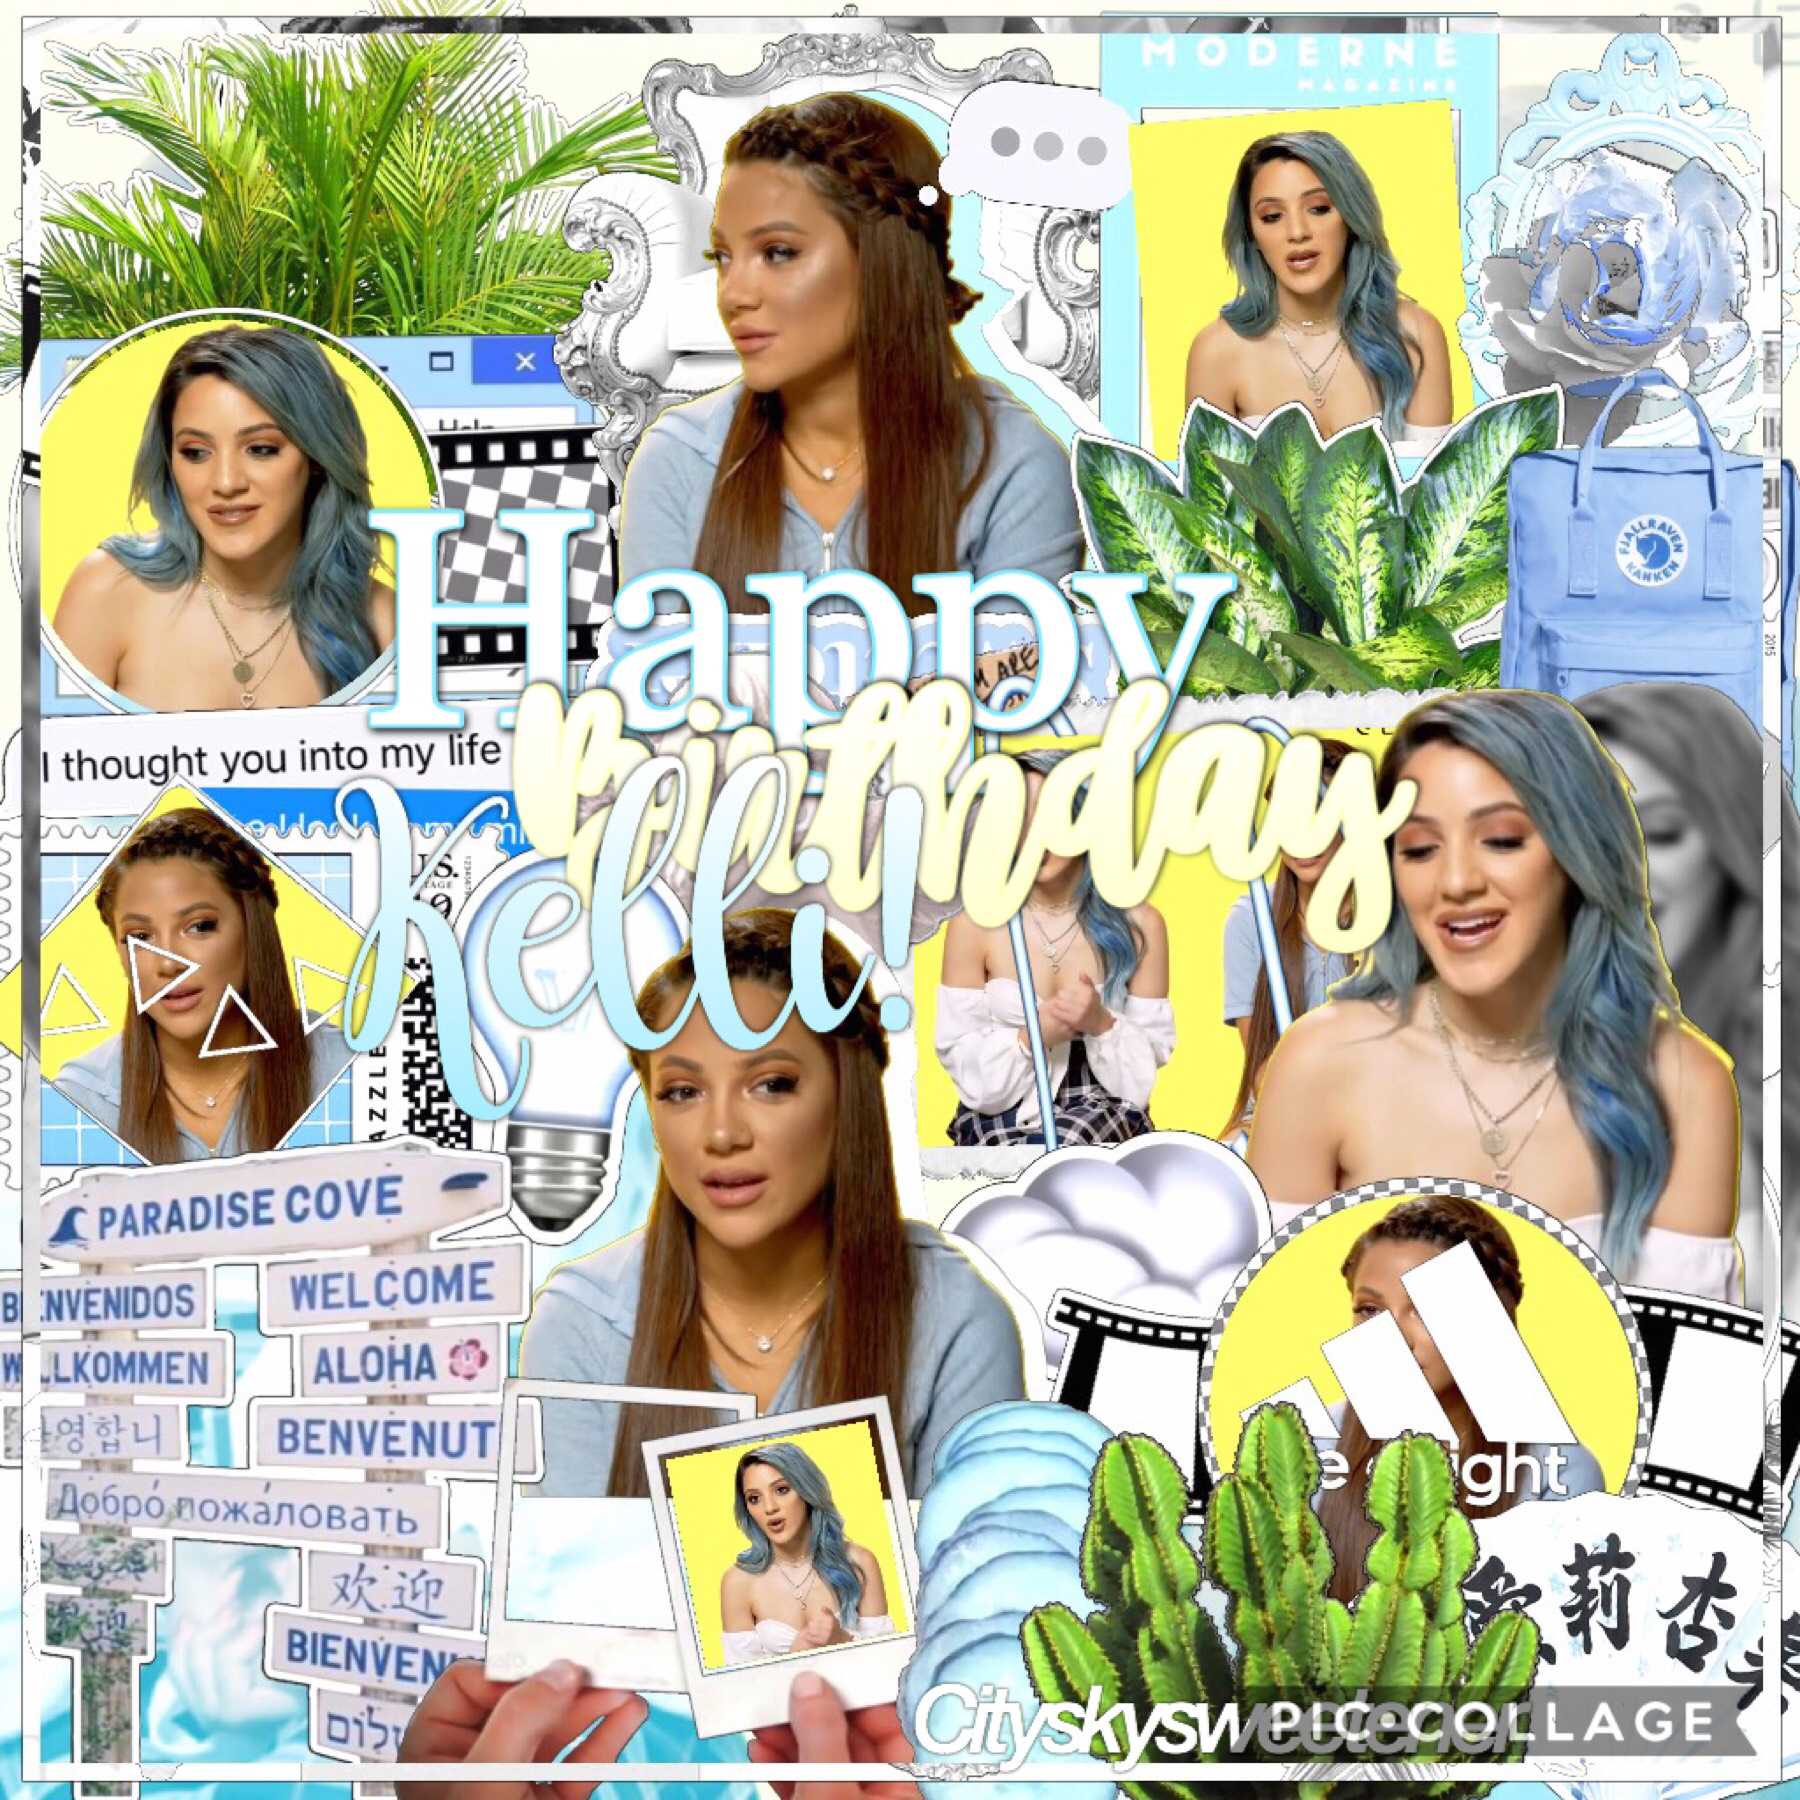 TAP FOR SOMEONES BDAYY!!!!💕🎂
HAPPY BIRTHDAY KELLIII!!!!🌟💕✨💘☁️(@zswaggerina) I’ve only known you for a little bit but I wanted to make this edit to wish you a happy birthday!!!😂🦋💘💘 hope you have a great day and lots of birthday wishes!!! -Kaela💕💕 (I’m actu